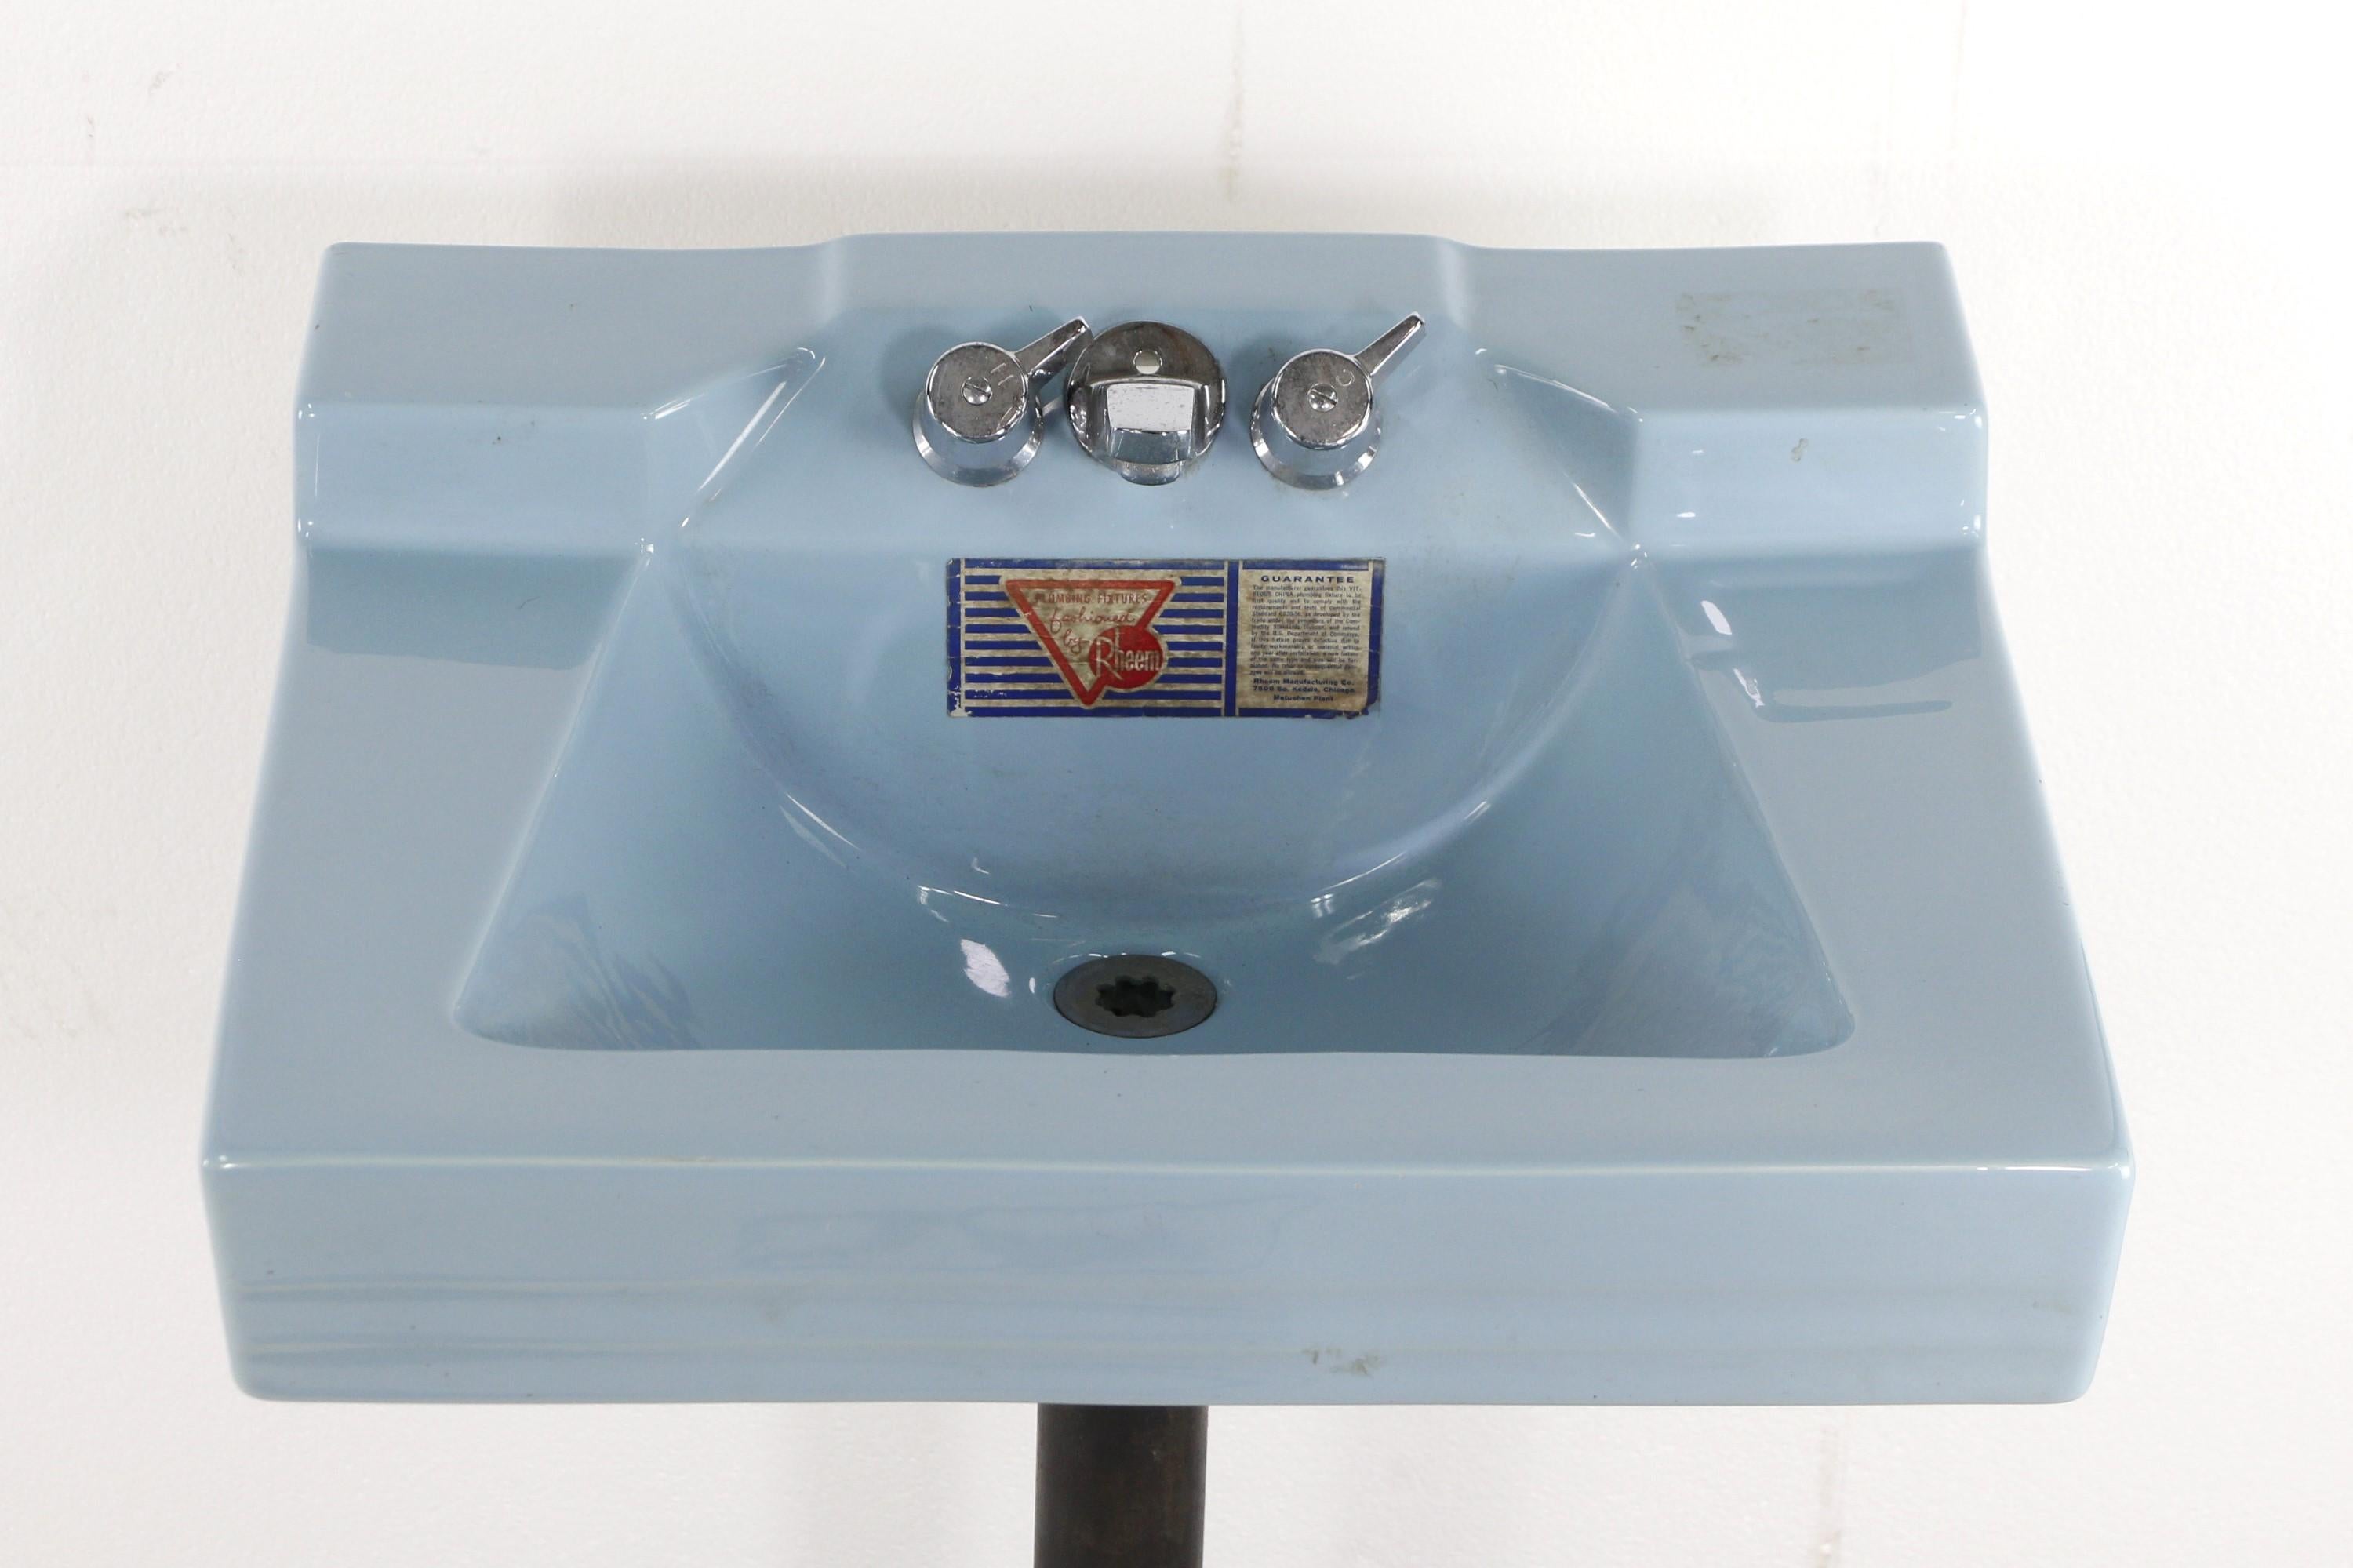 Mid 20th Century Mid-Century Modern light blue wall sink with the original nickel plated hardware. Manufactured by Rheem. Never used, still with the original manufacturer's label on it. This can be seen at our 400 Gilligan St location in Scranton,